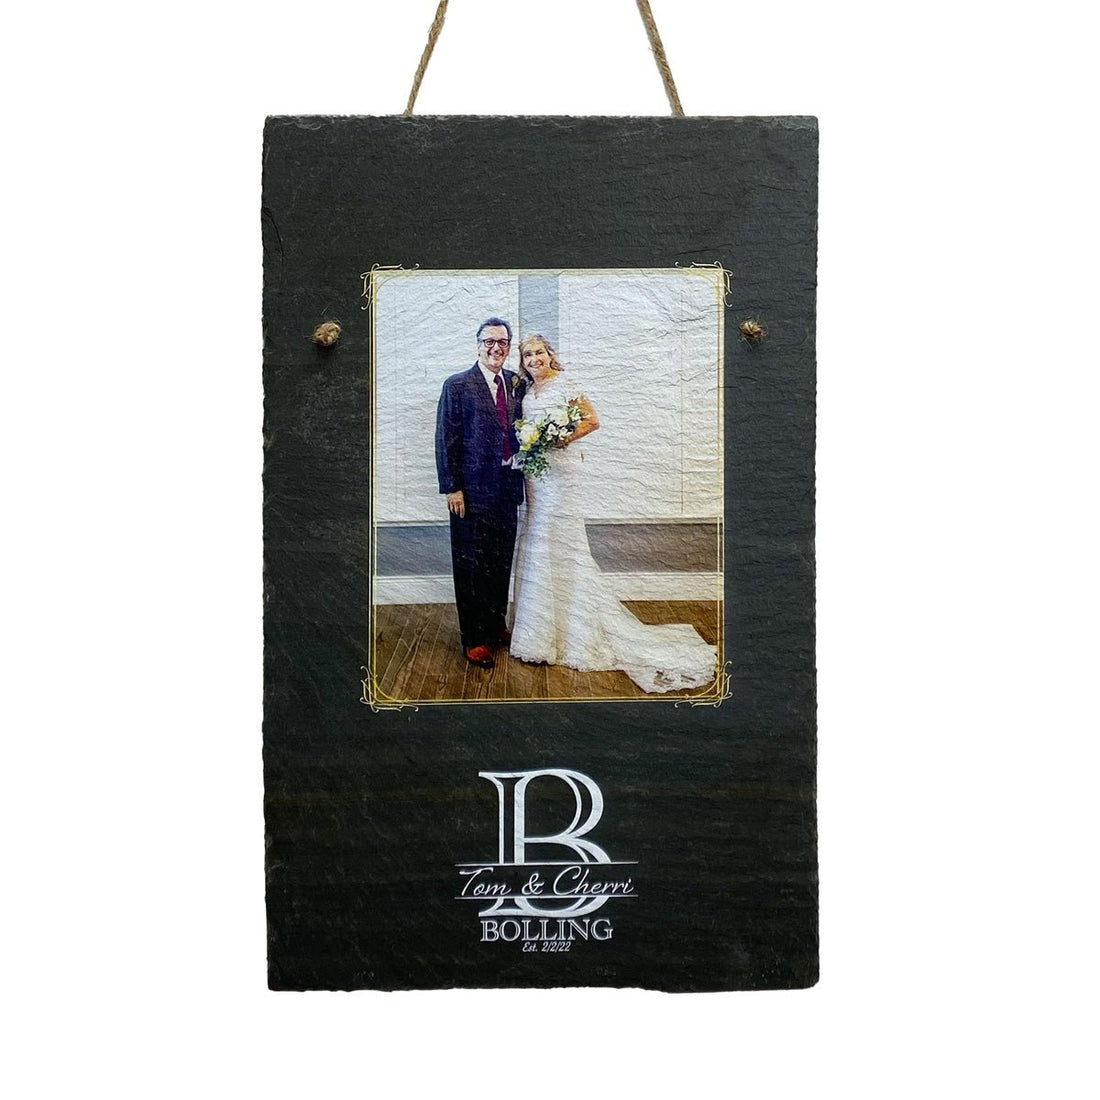 Personalized UV Printed Image (Portrait Format) and Text on 9.75"x15.75" 